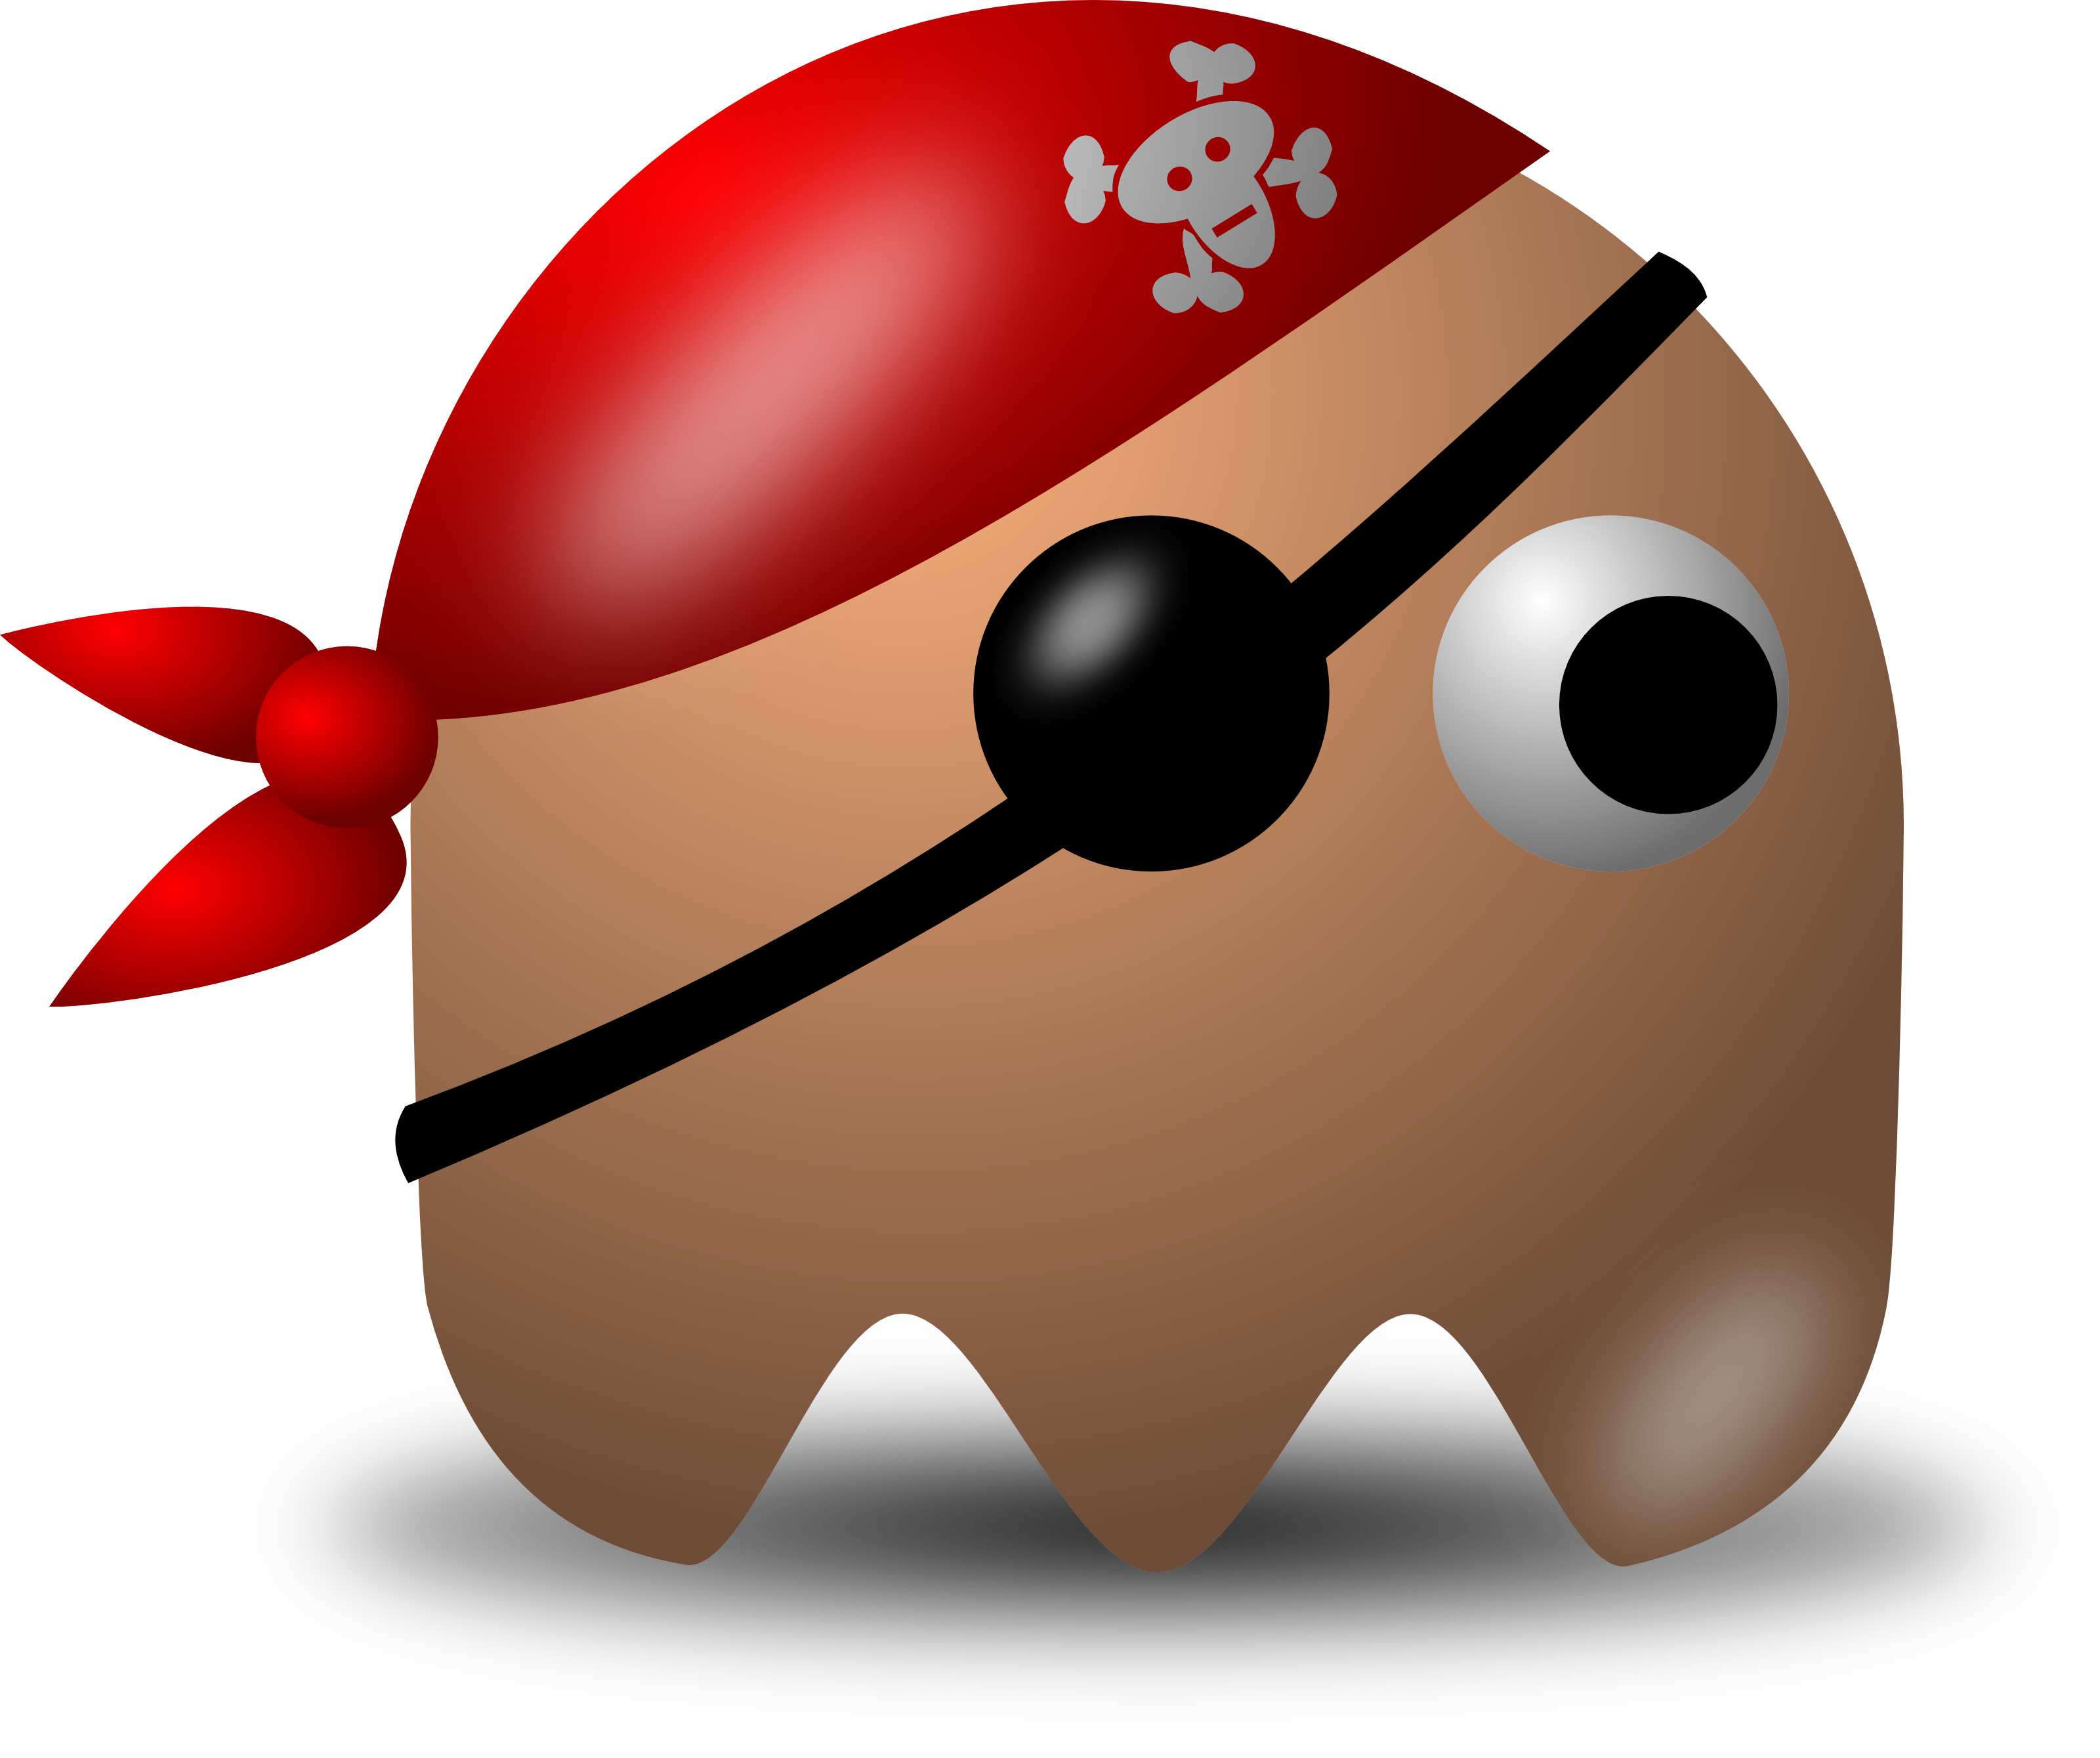 avatar pirate character wearing eyepatch and bandana vector clipart illustration #29748